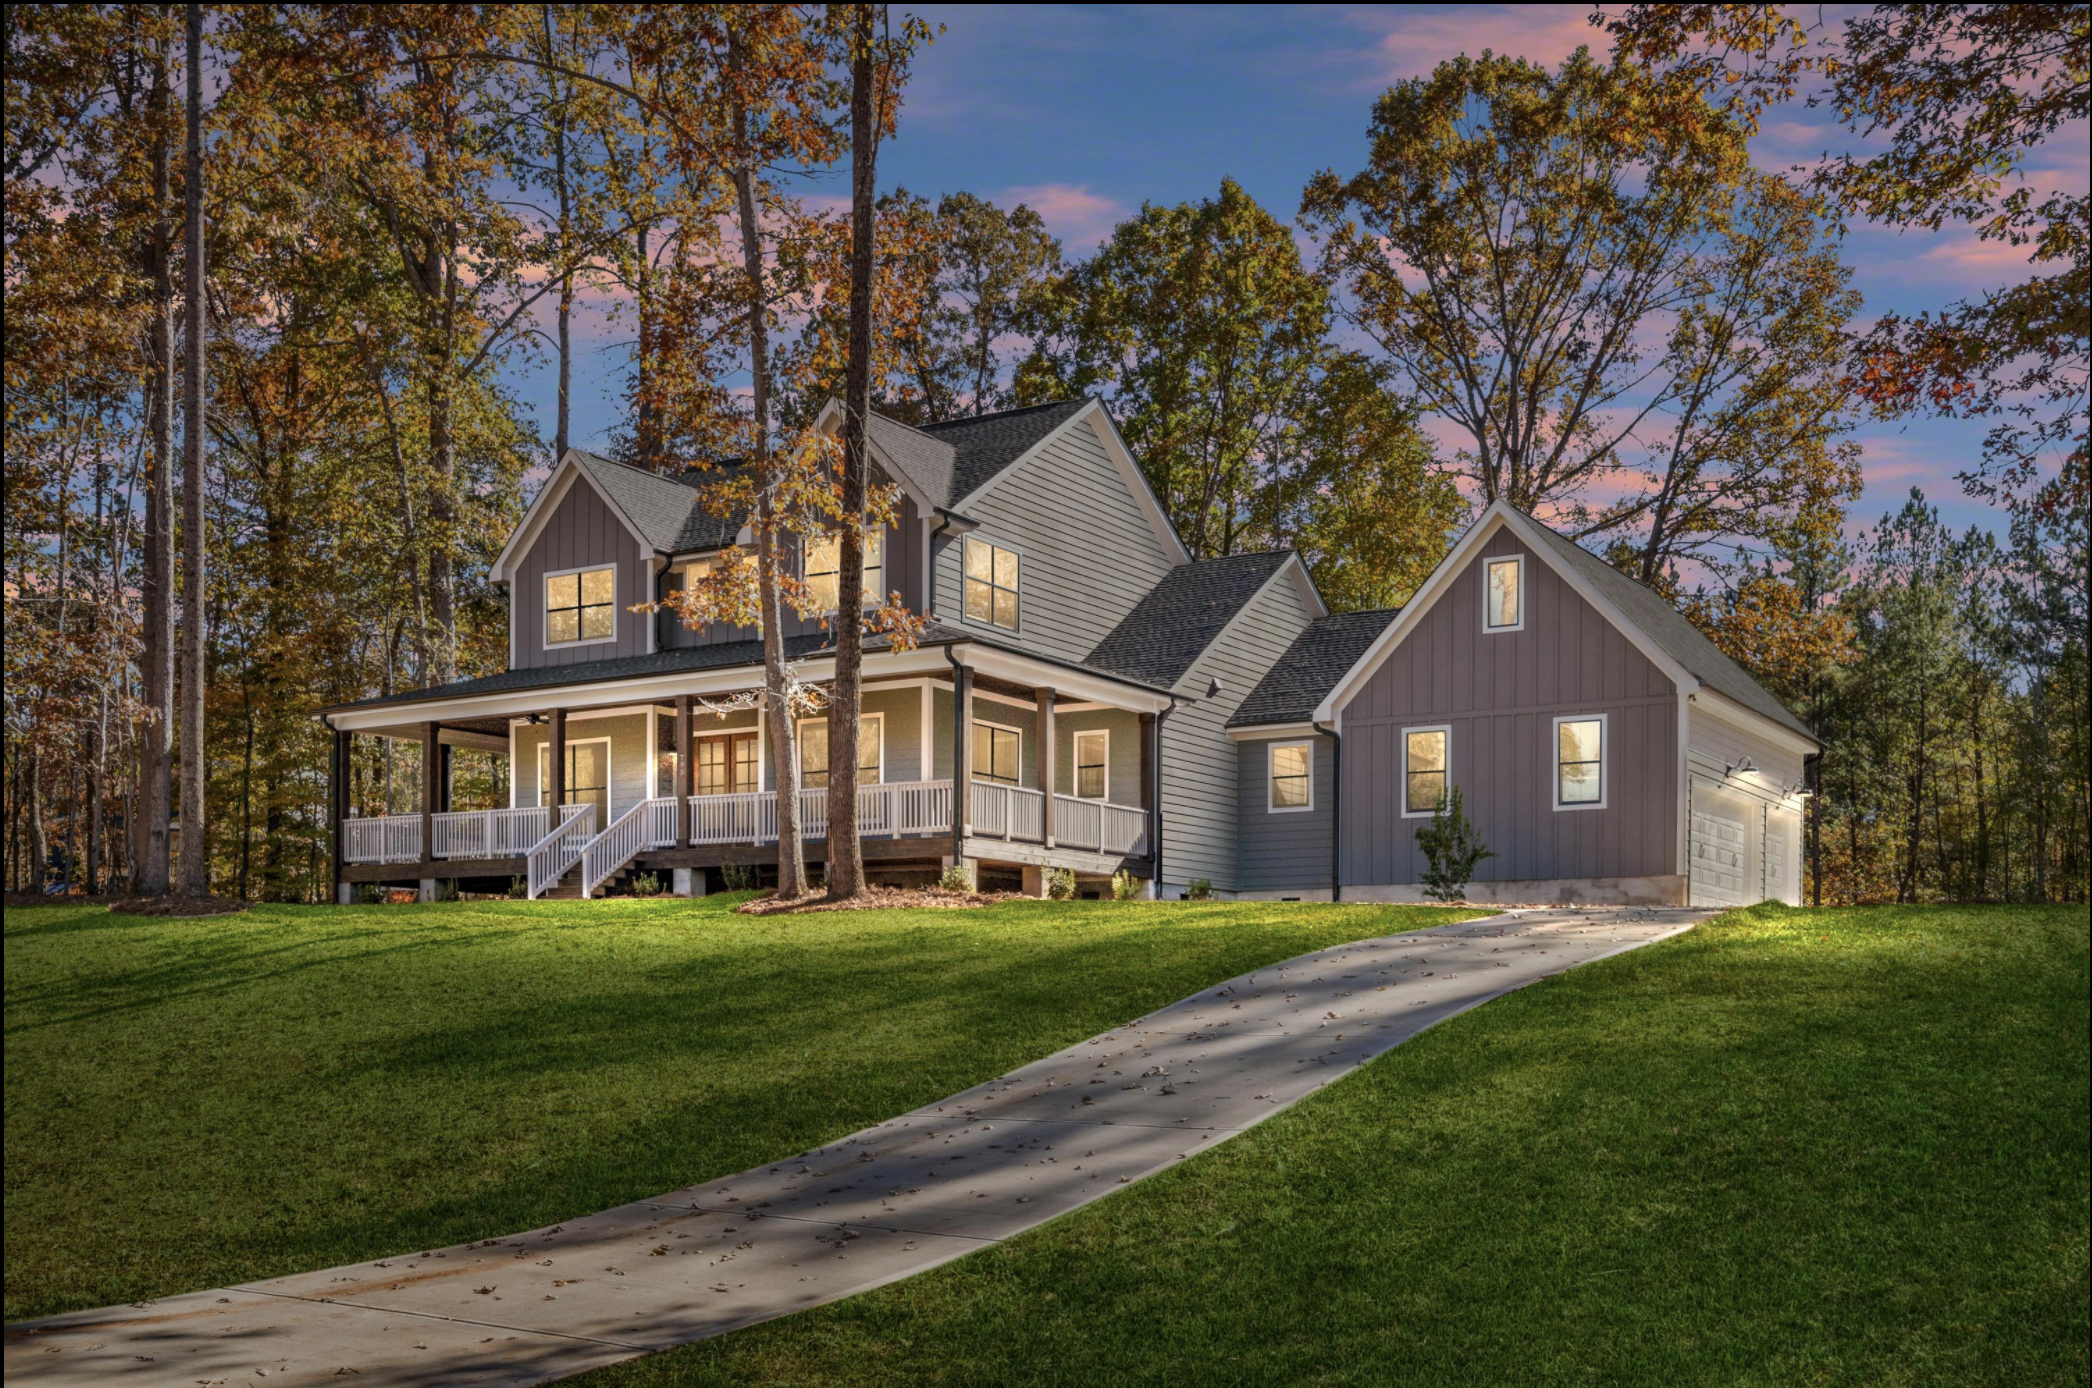 Modern farmhouse in Clover, SC built by Constructing Up, LLC and financed by Fund That Flip.